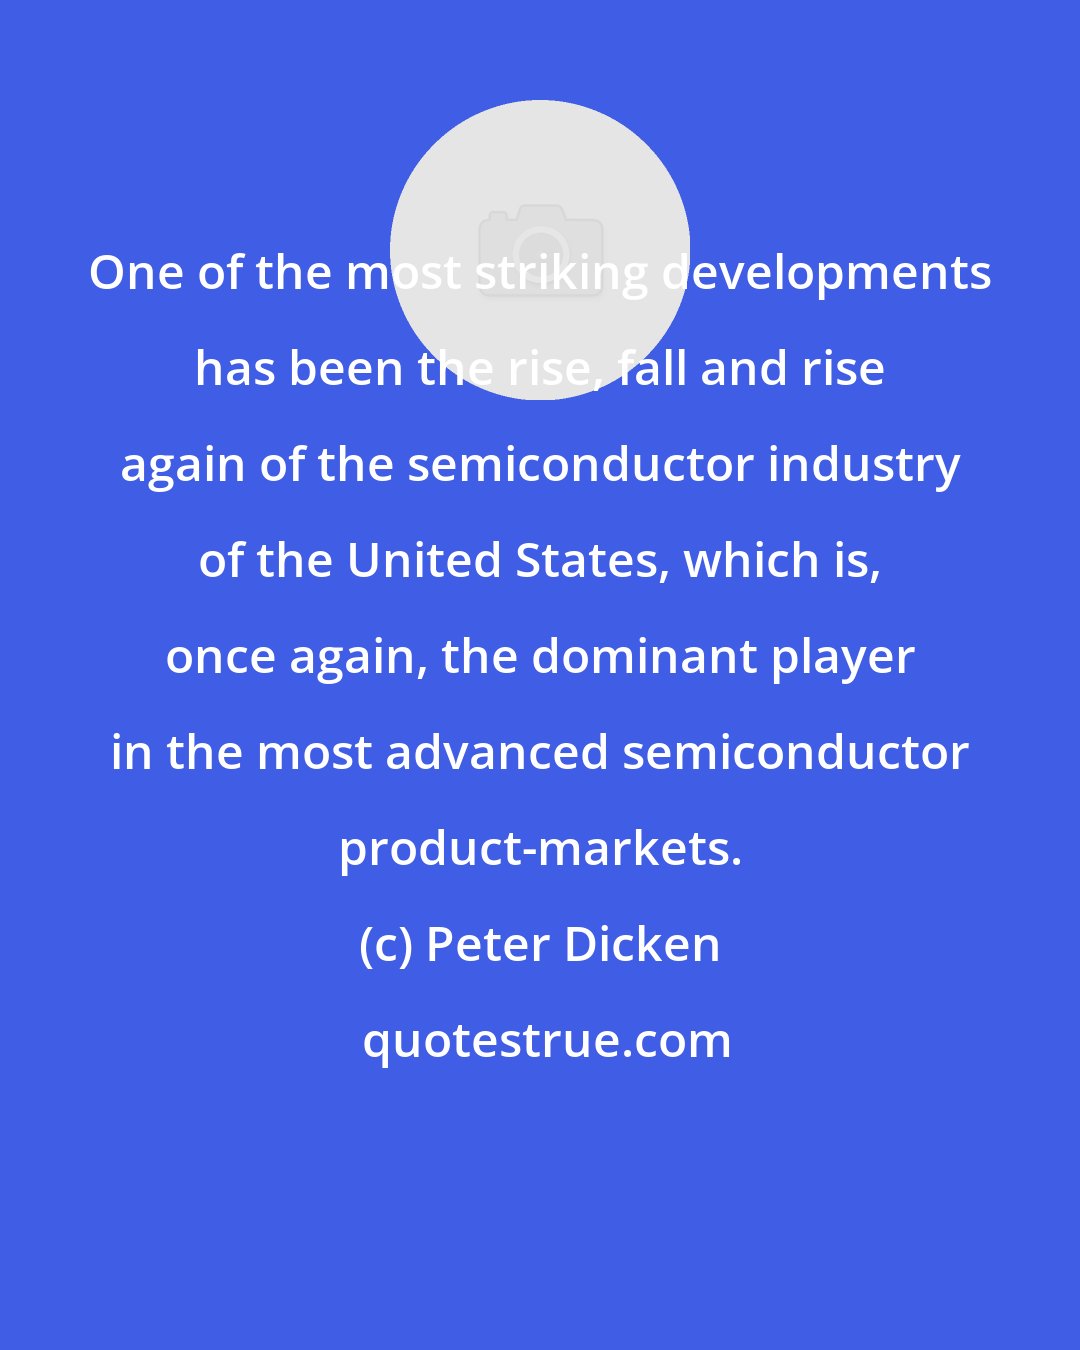 Peter Dicken: One of the most striking developments has been the rise, fall and rise again of the semiconductor industry of the United States, which is, once again, the dominant player in the most advanced semiconductor product-markets.